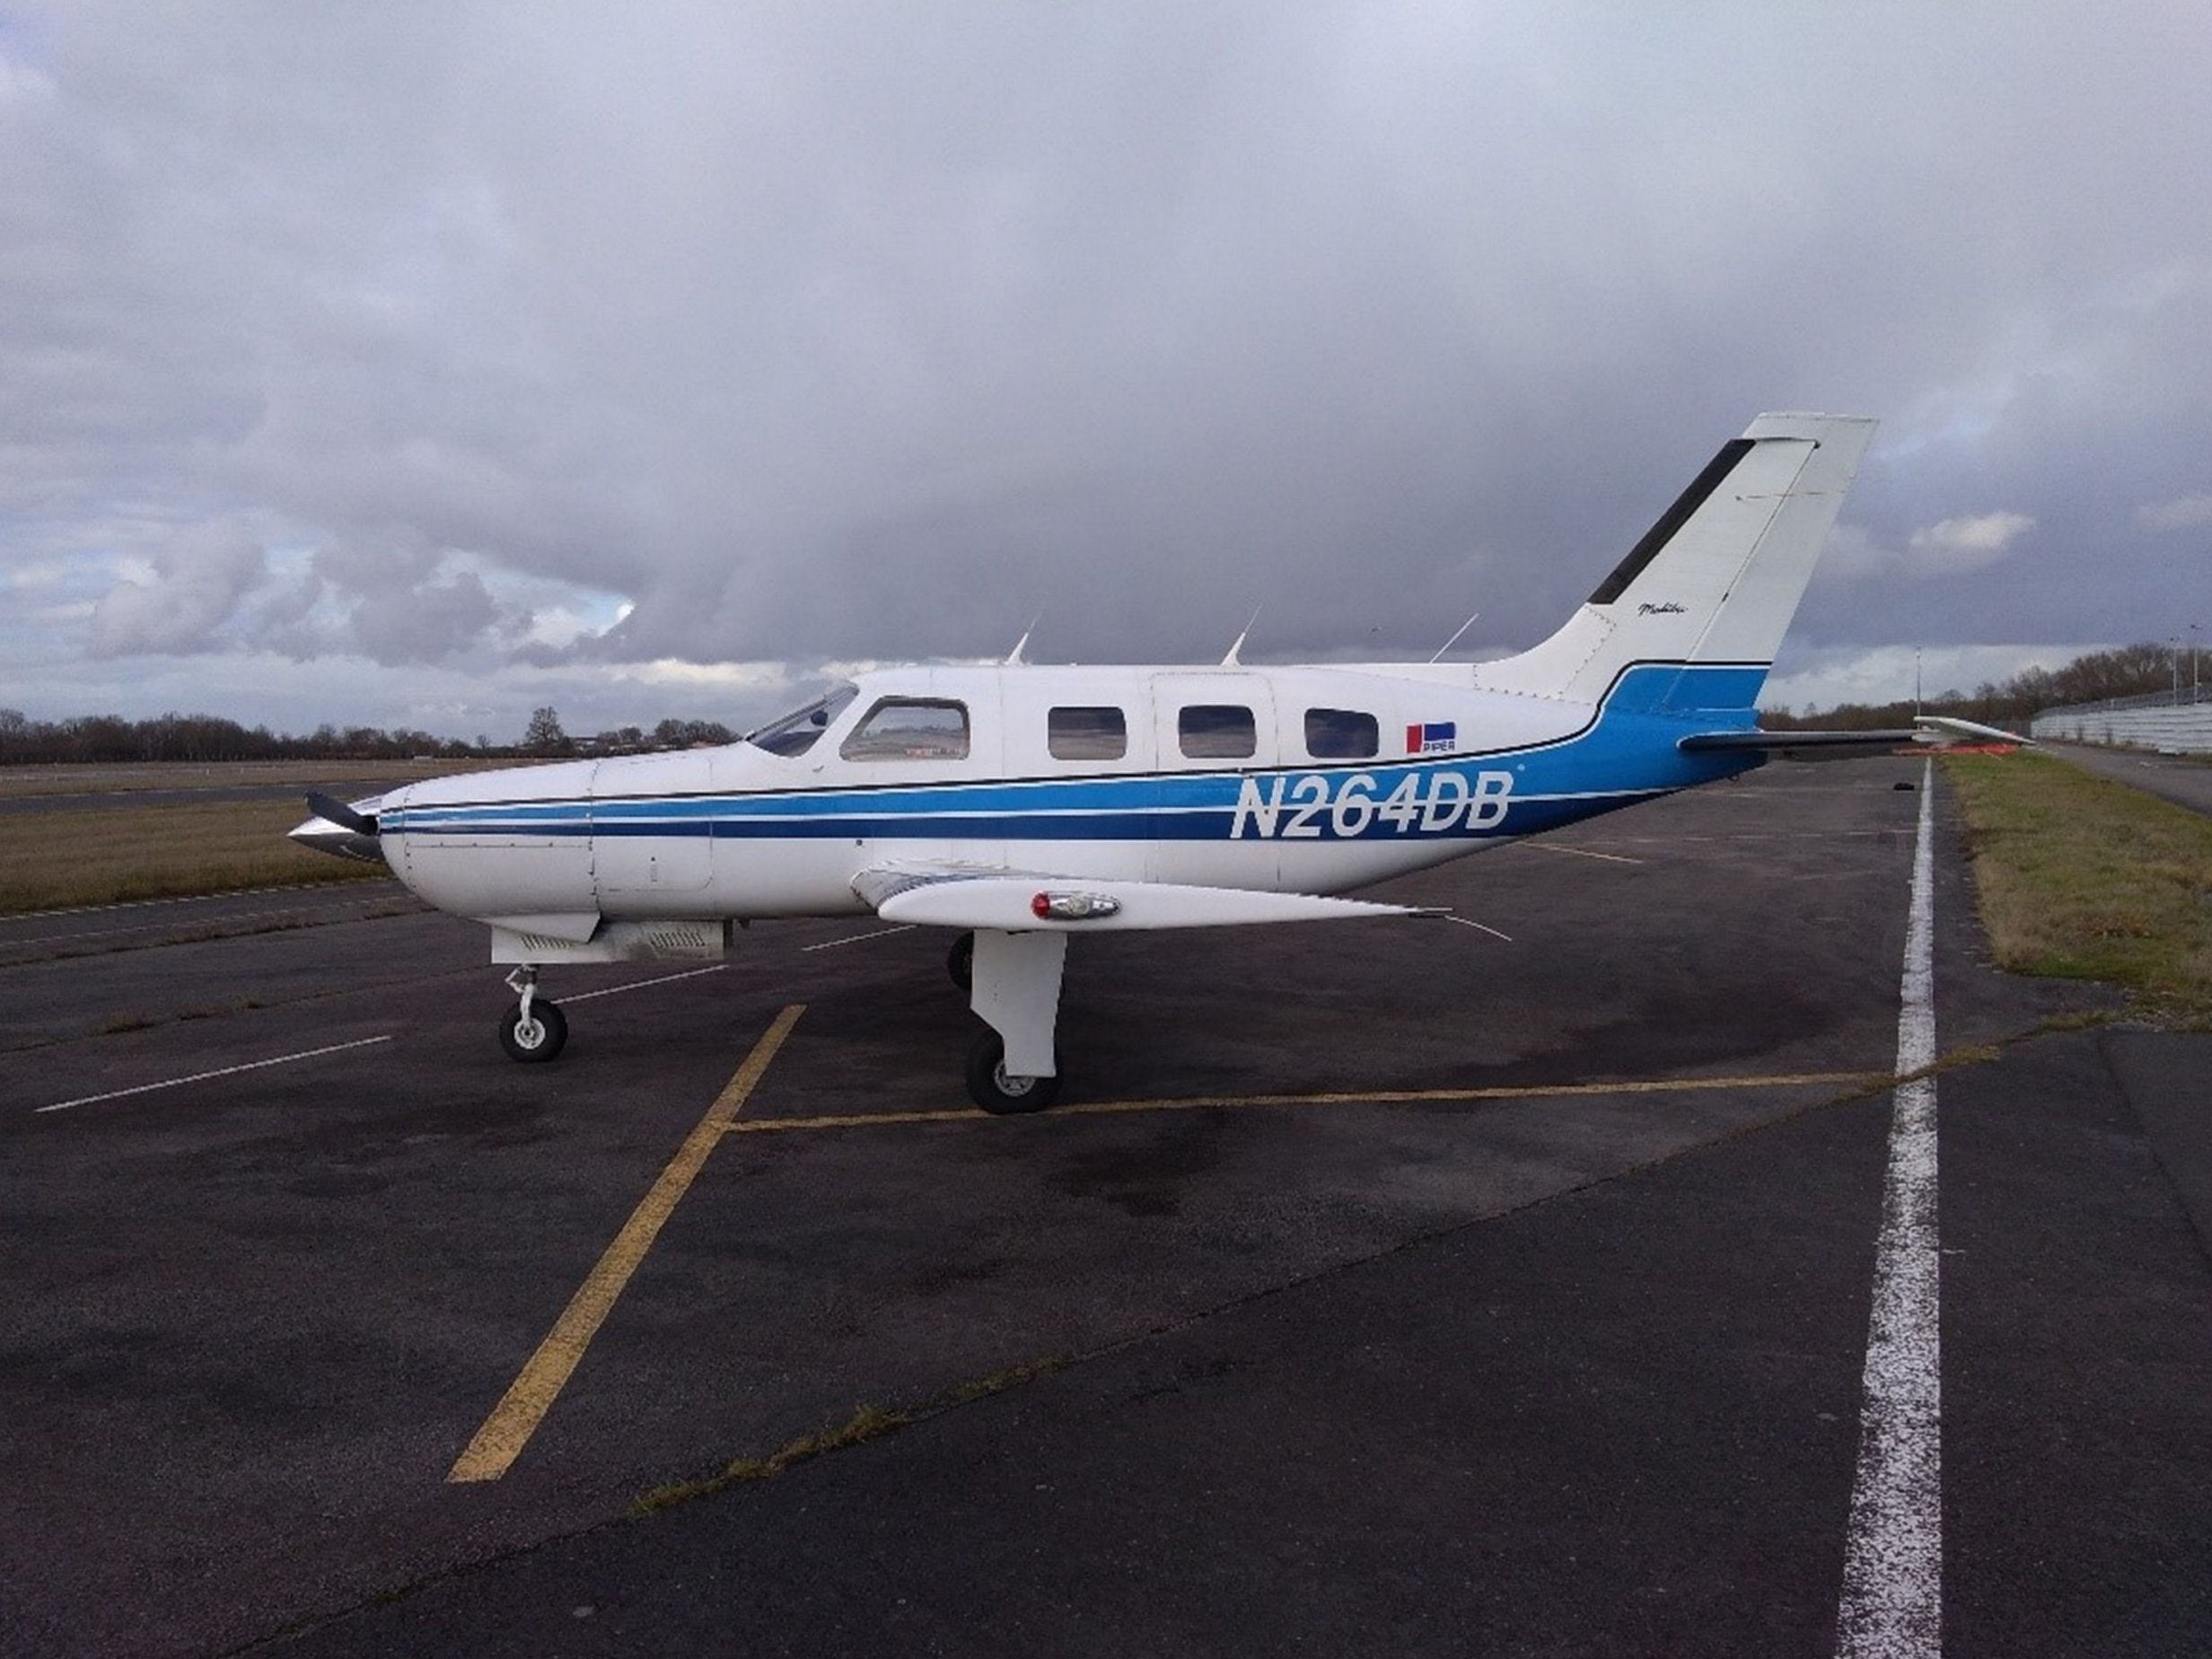 The Piper Malibu aircraft, N264DB, that crashed in the English Channel carrying footballer Emiliano Sala and pilot David Ibbotson